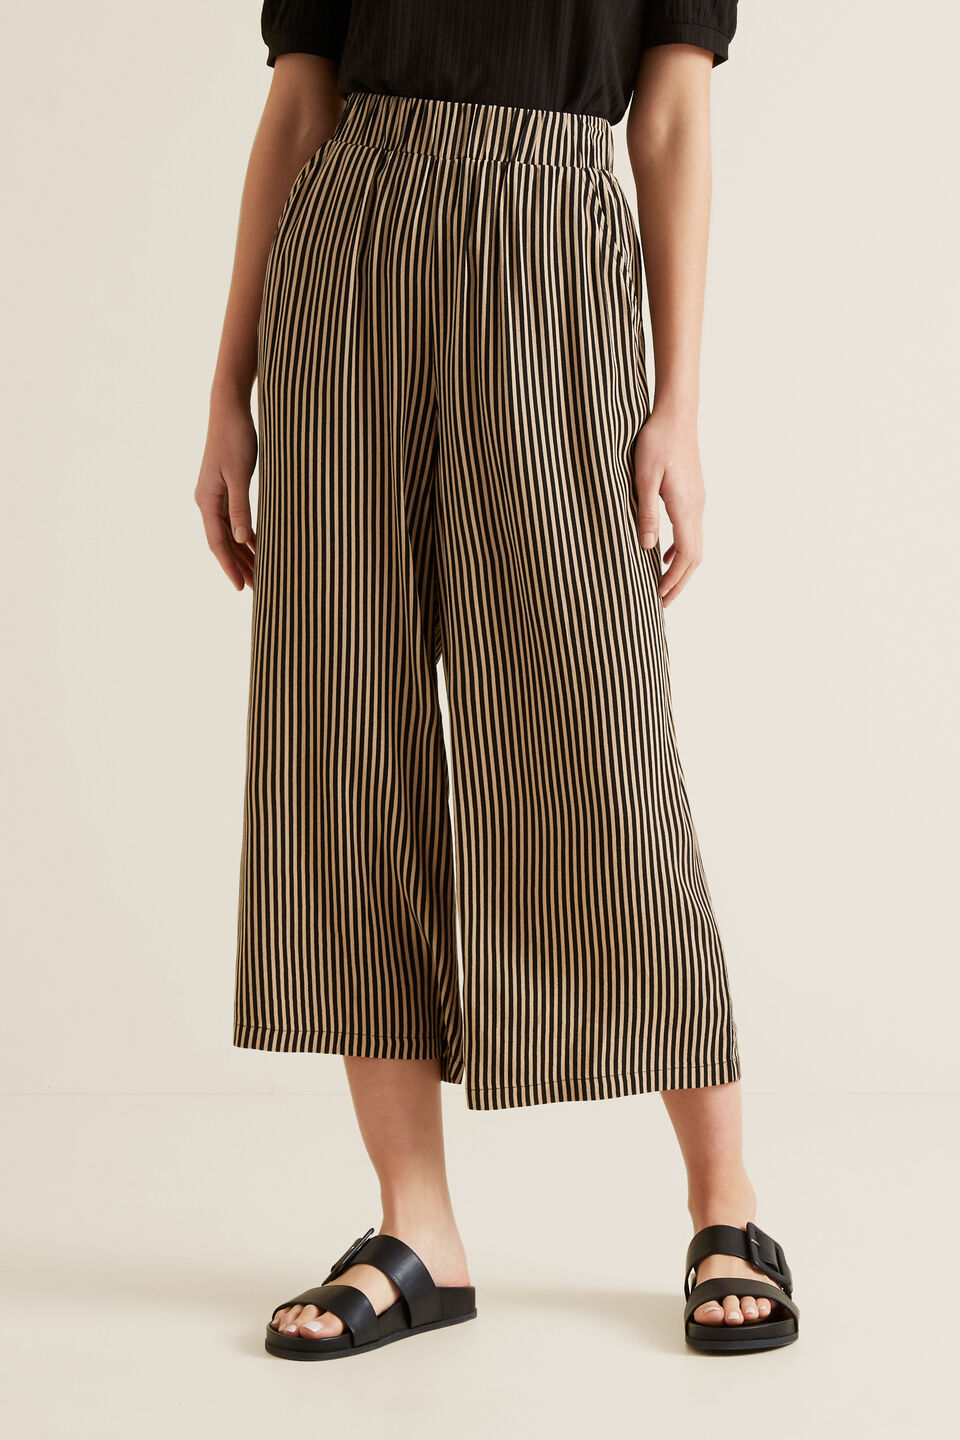 Stripe Relaxed Pant  